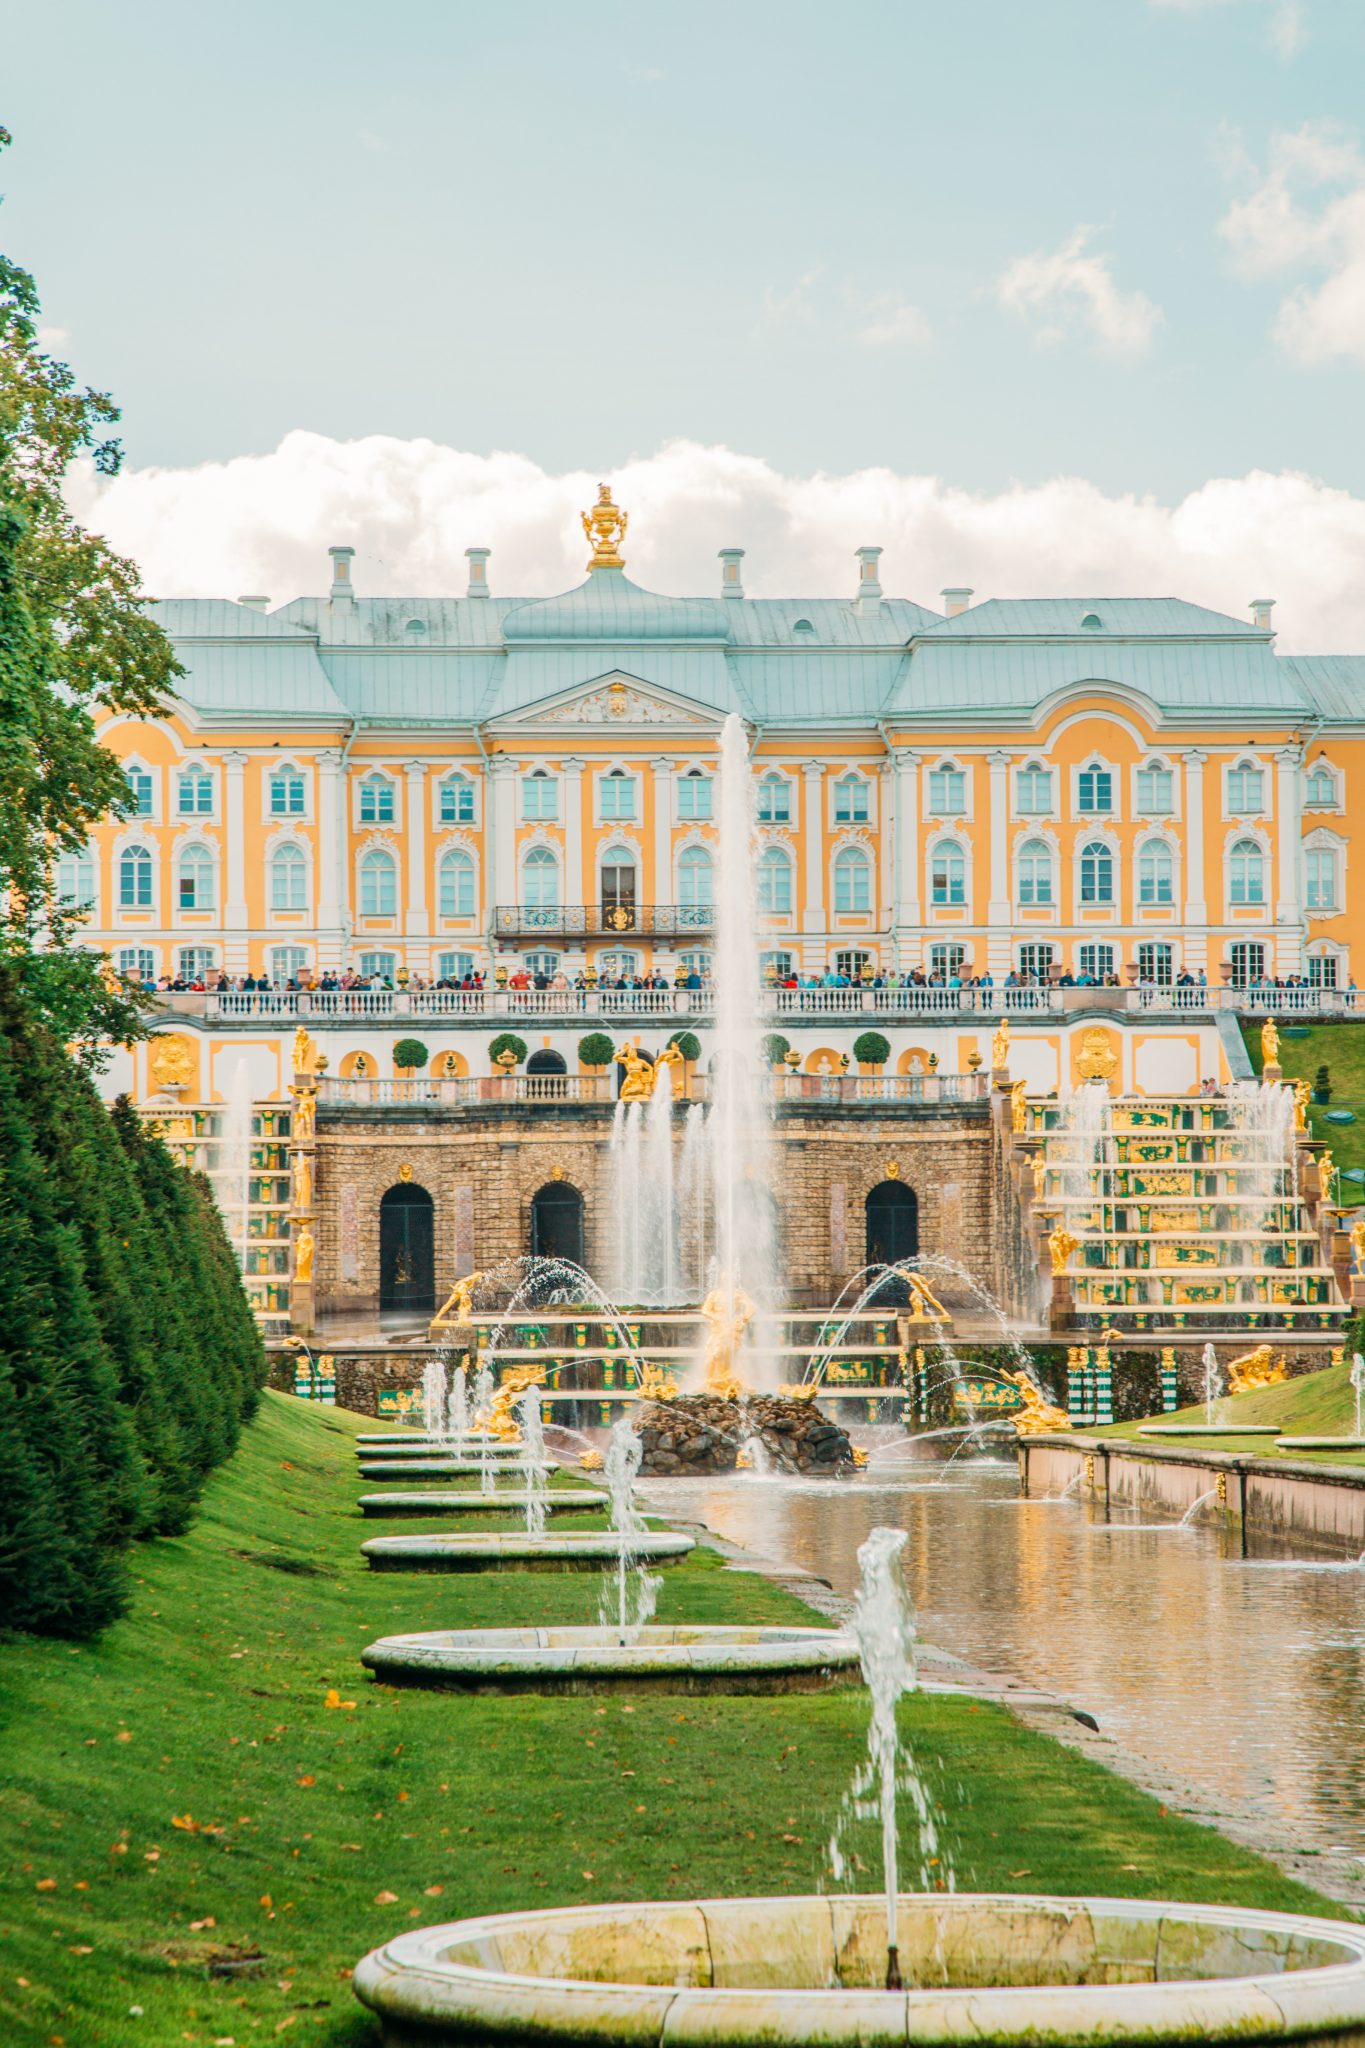 Inside the Lower Park at Peterhof Palace.